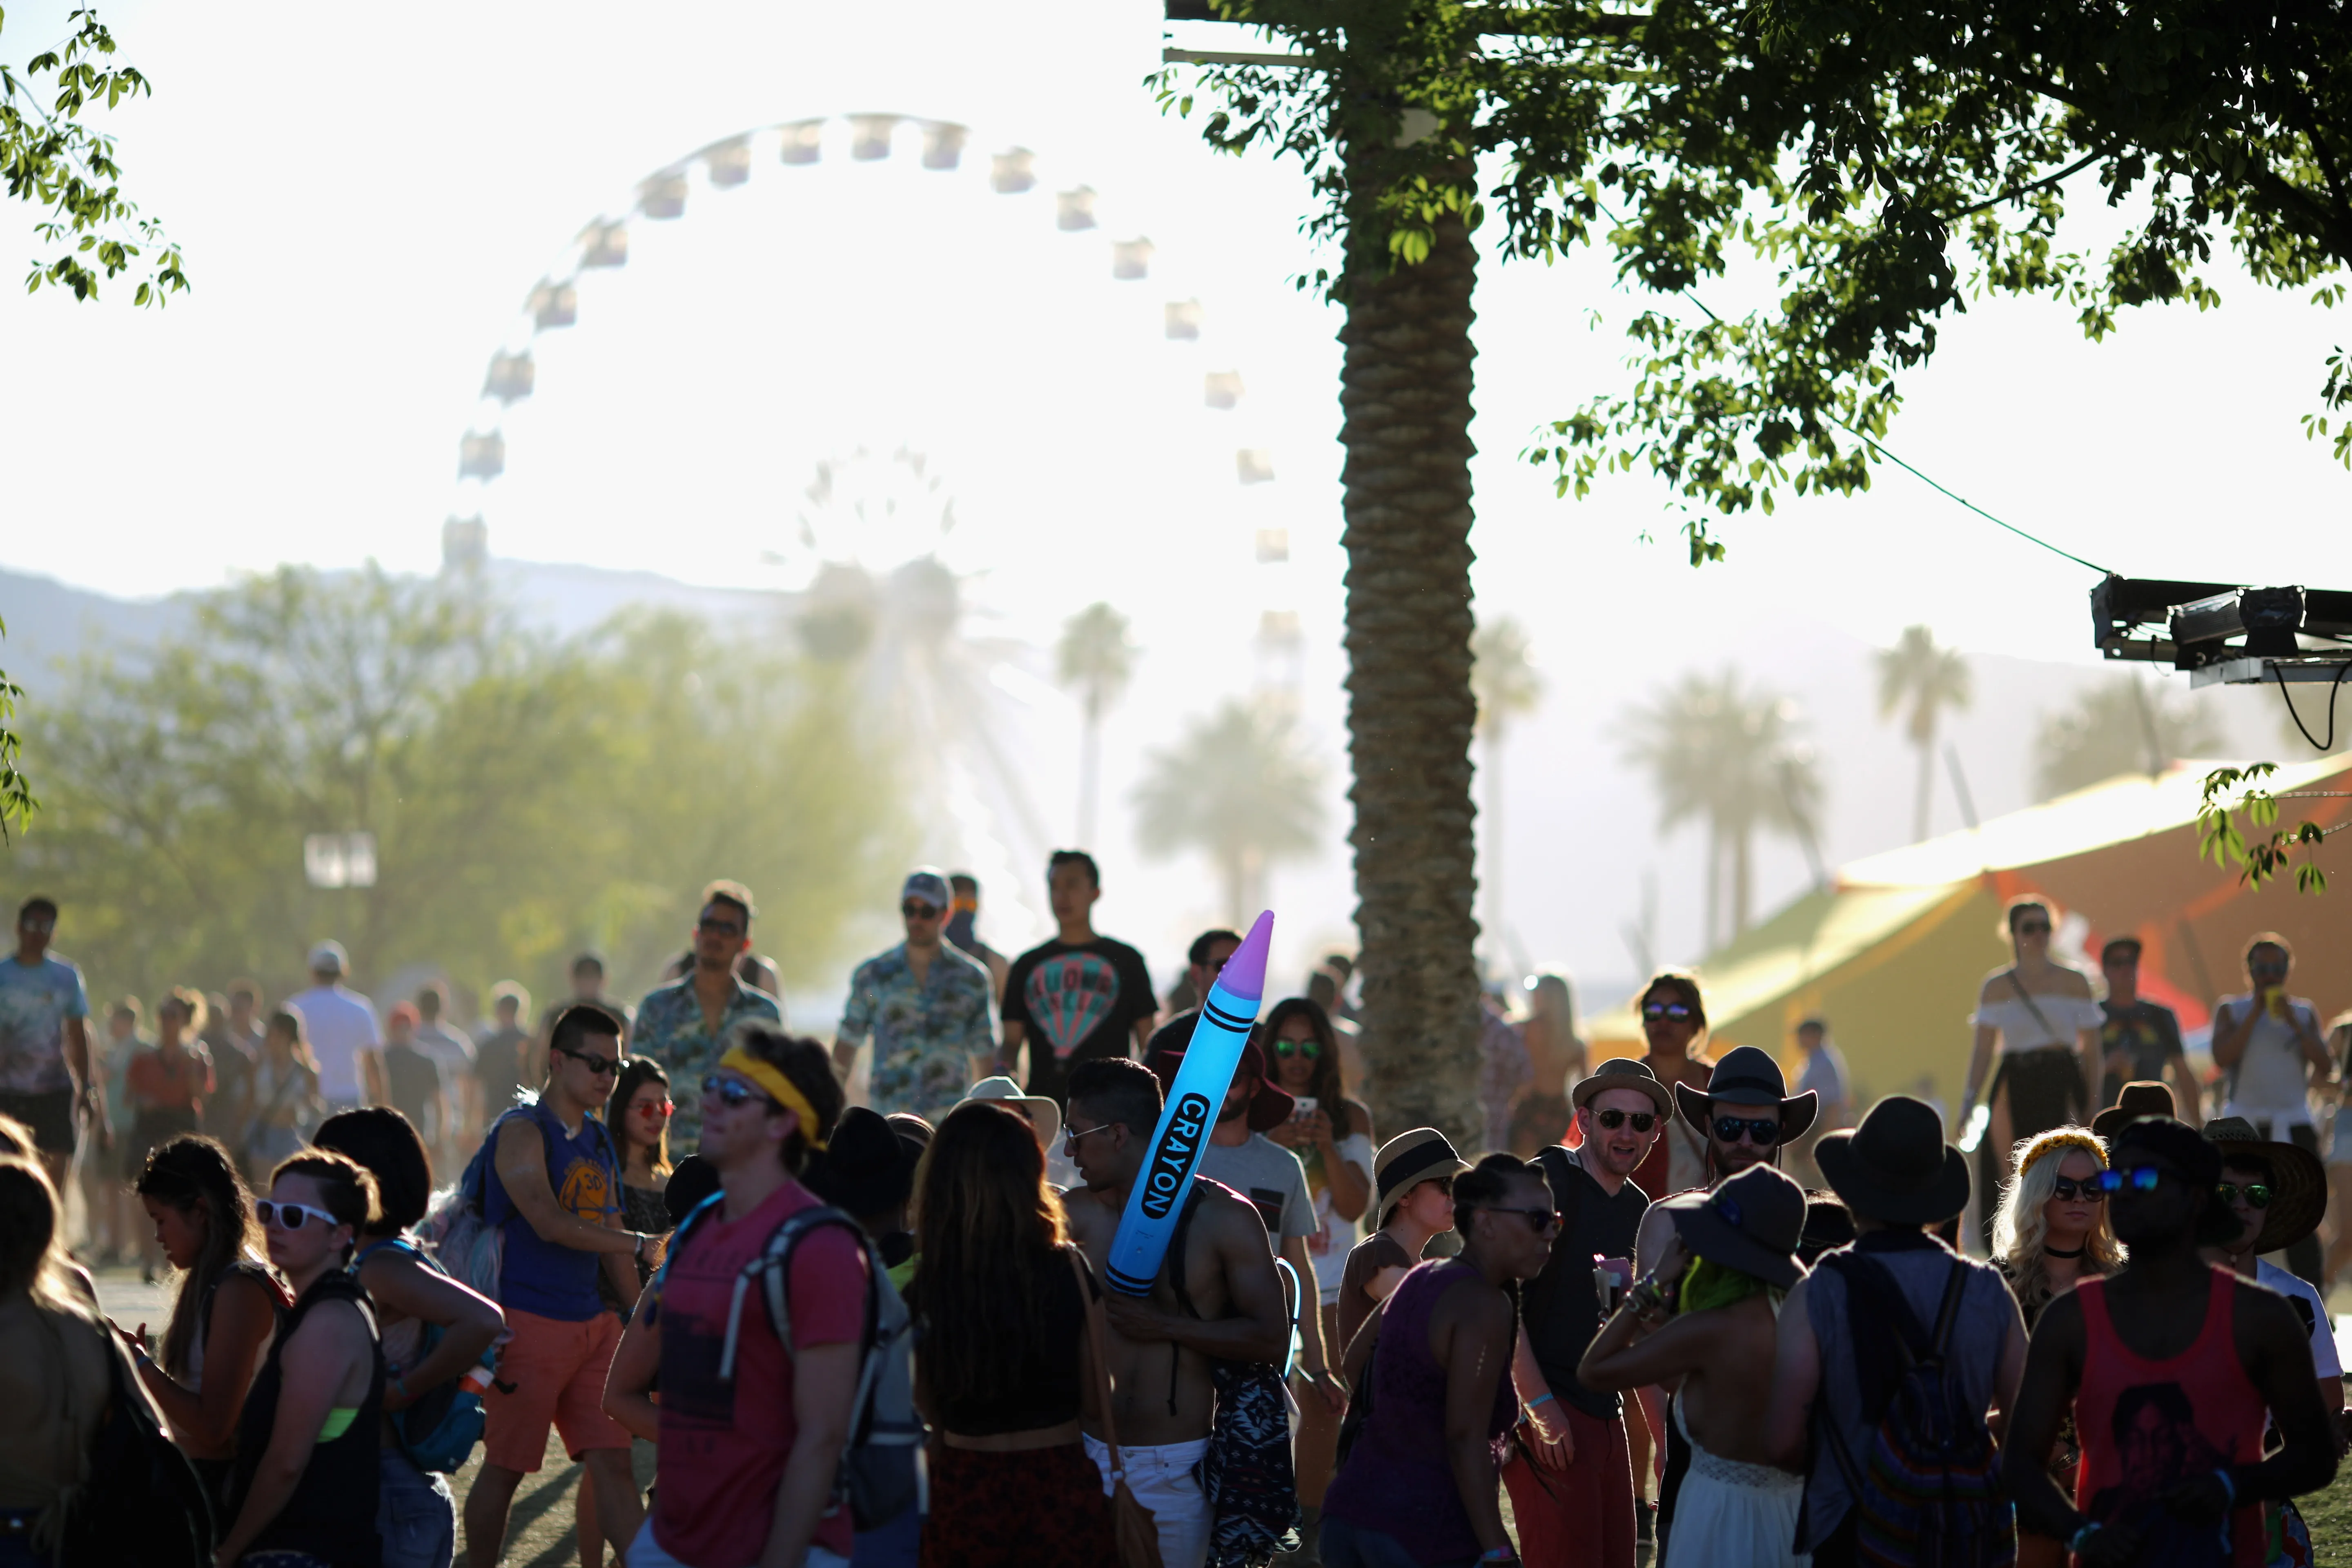 Coachella 'Post Office' Says You Shouldn't Mail in Tax Returns from the Festival